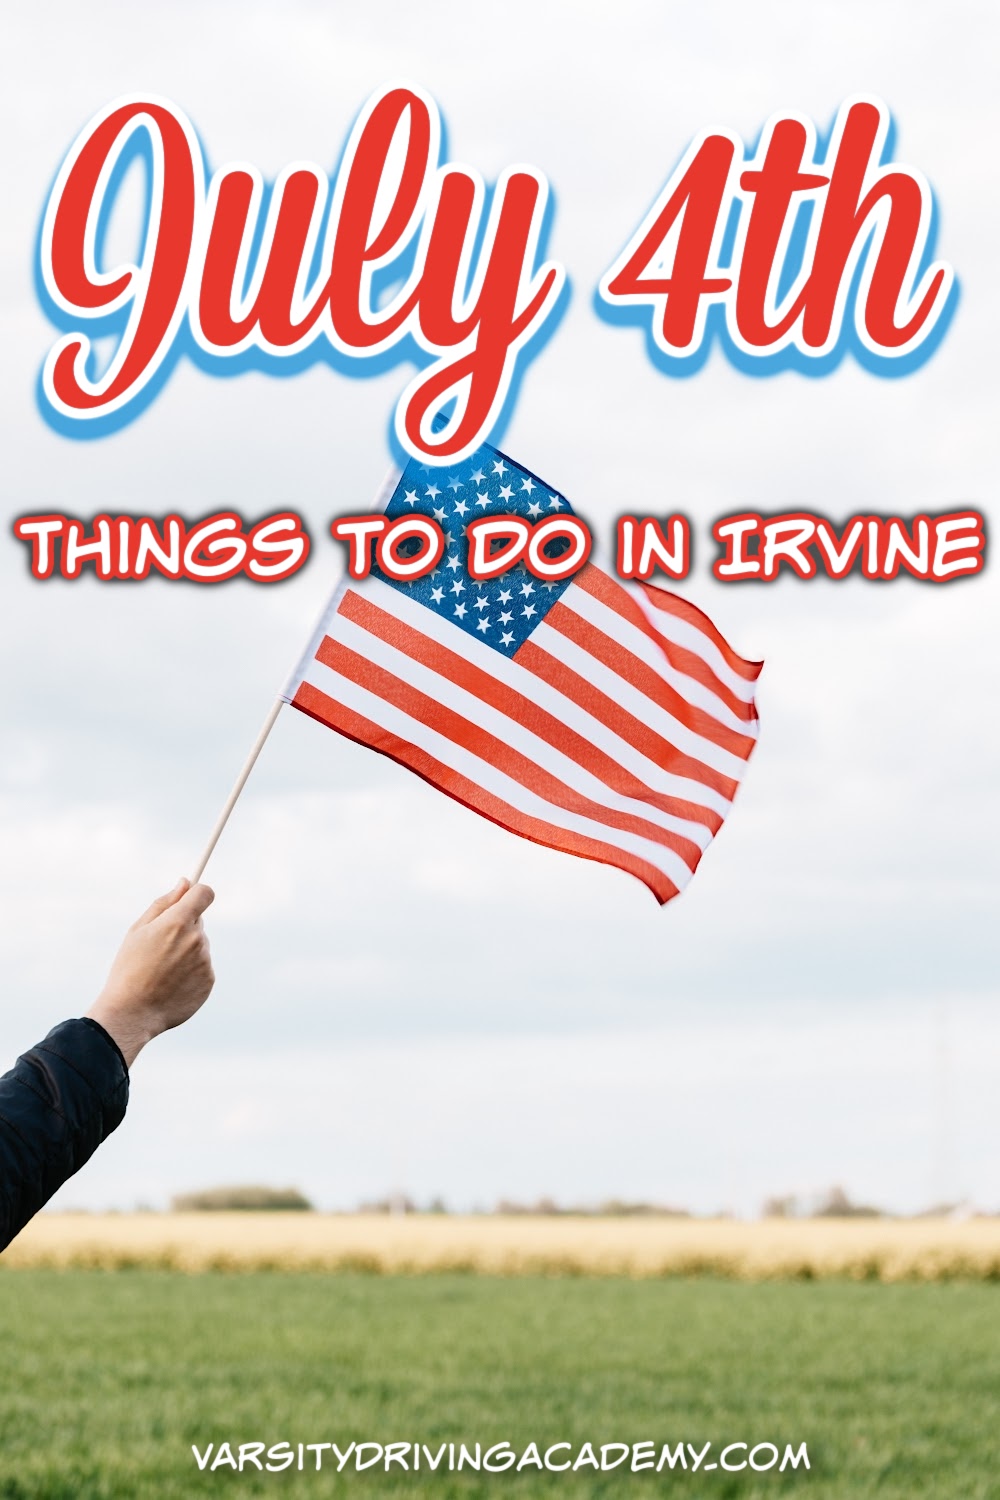 The best way to celebrate is to go out and enjoy one of the July 4th things to do in Irvine with family and friends.